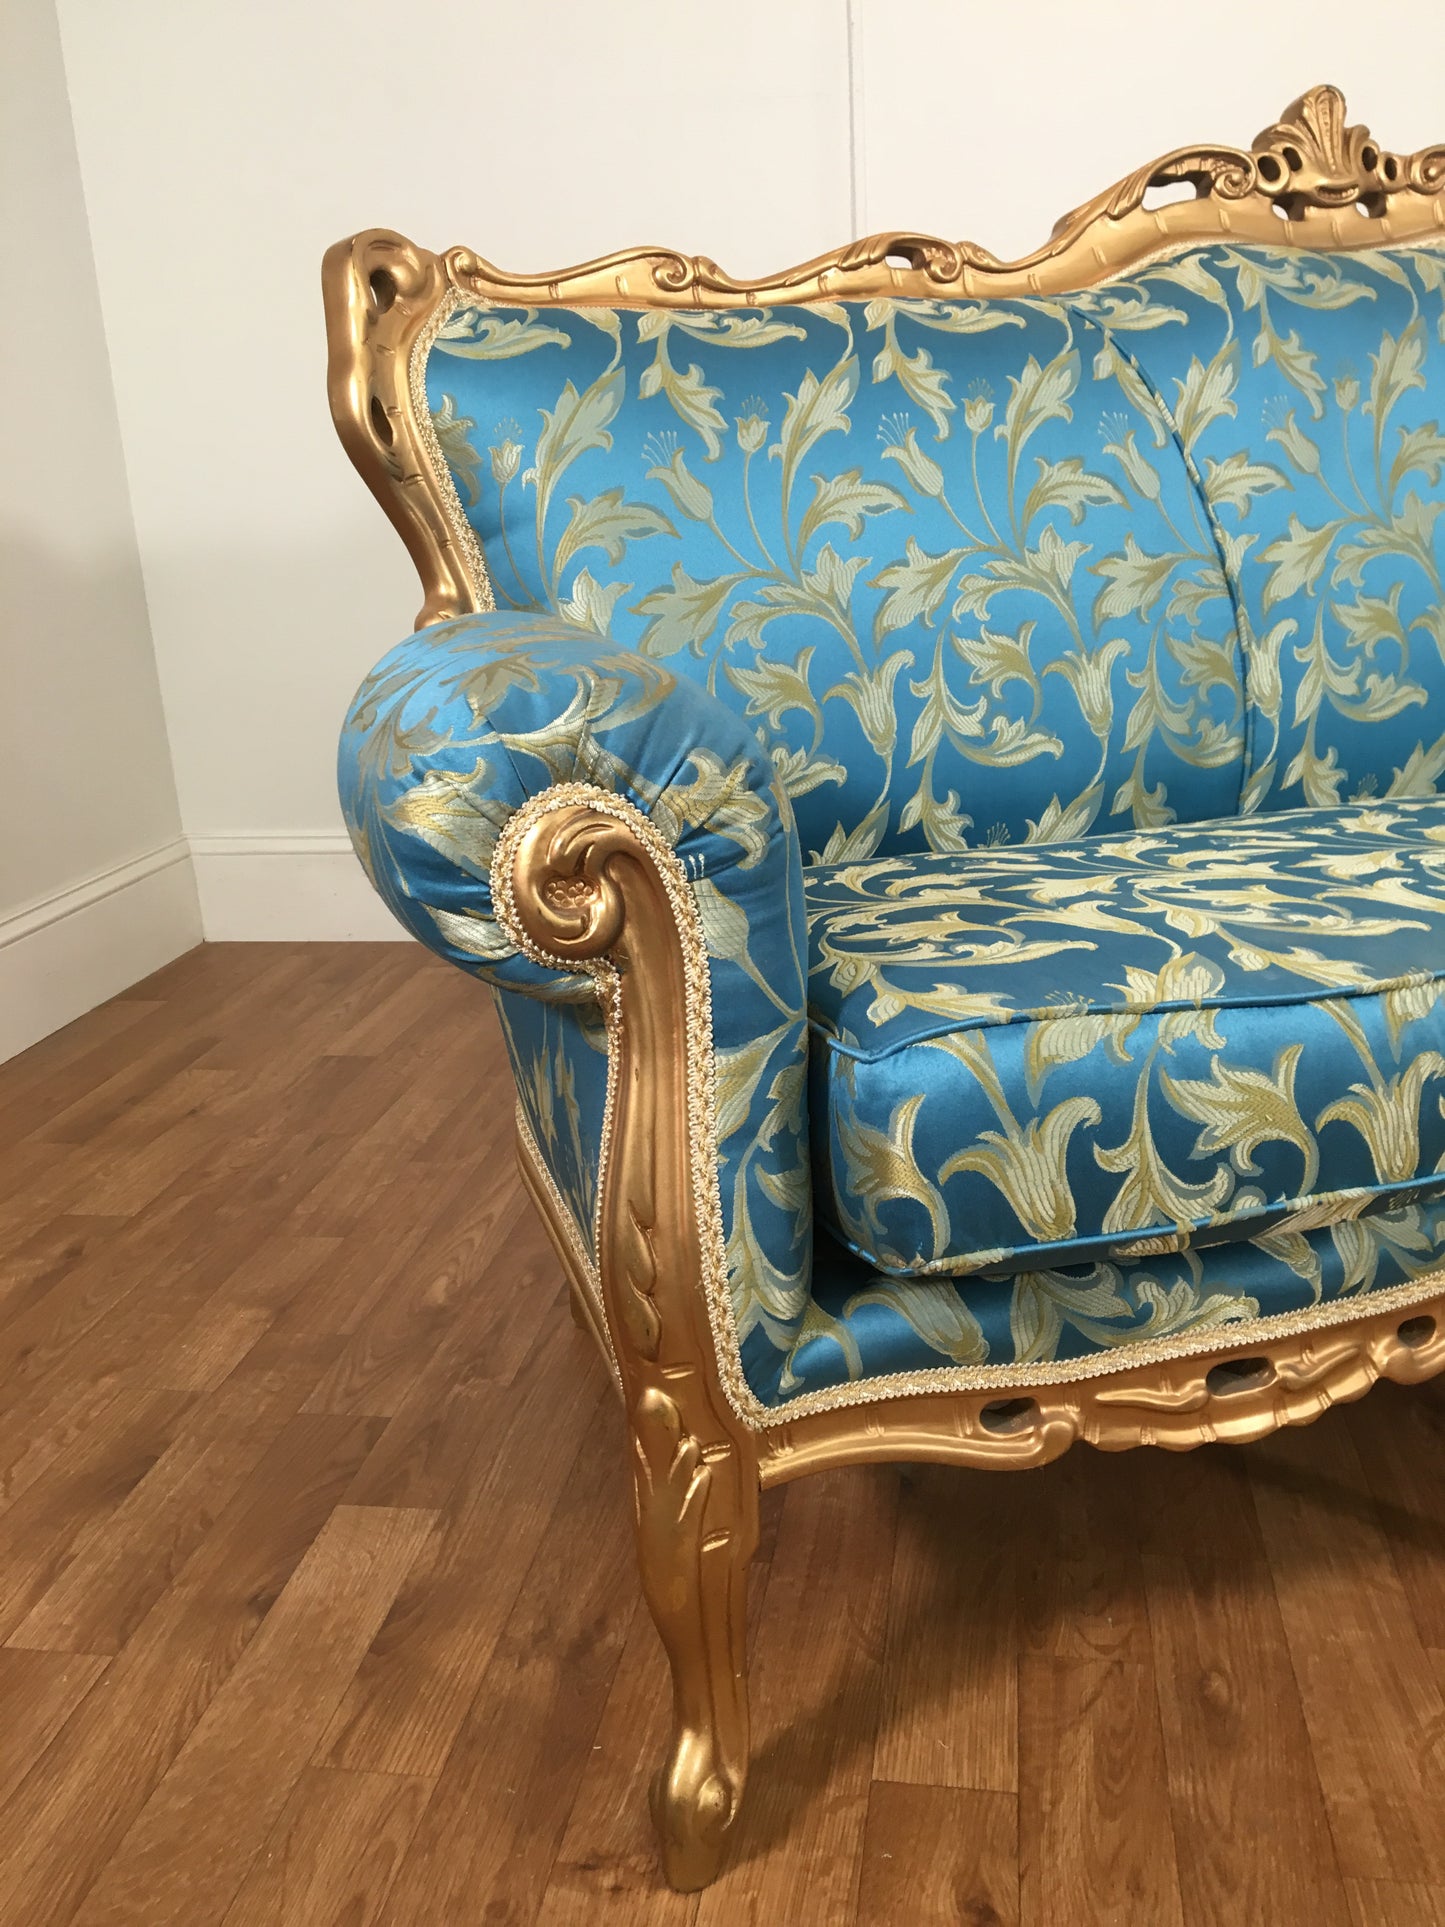 ORNATE ROCOCO GOLD AND ROBINS EGG BLUE COUCH